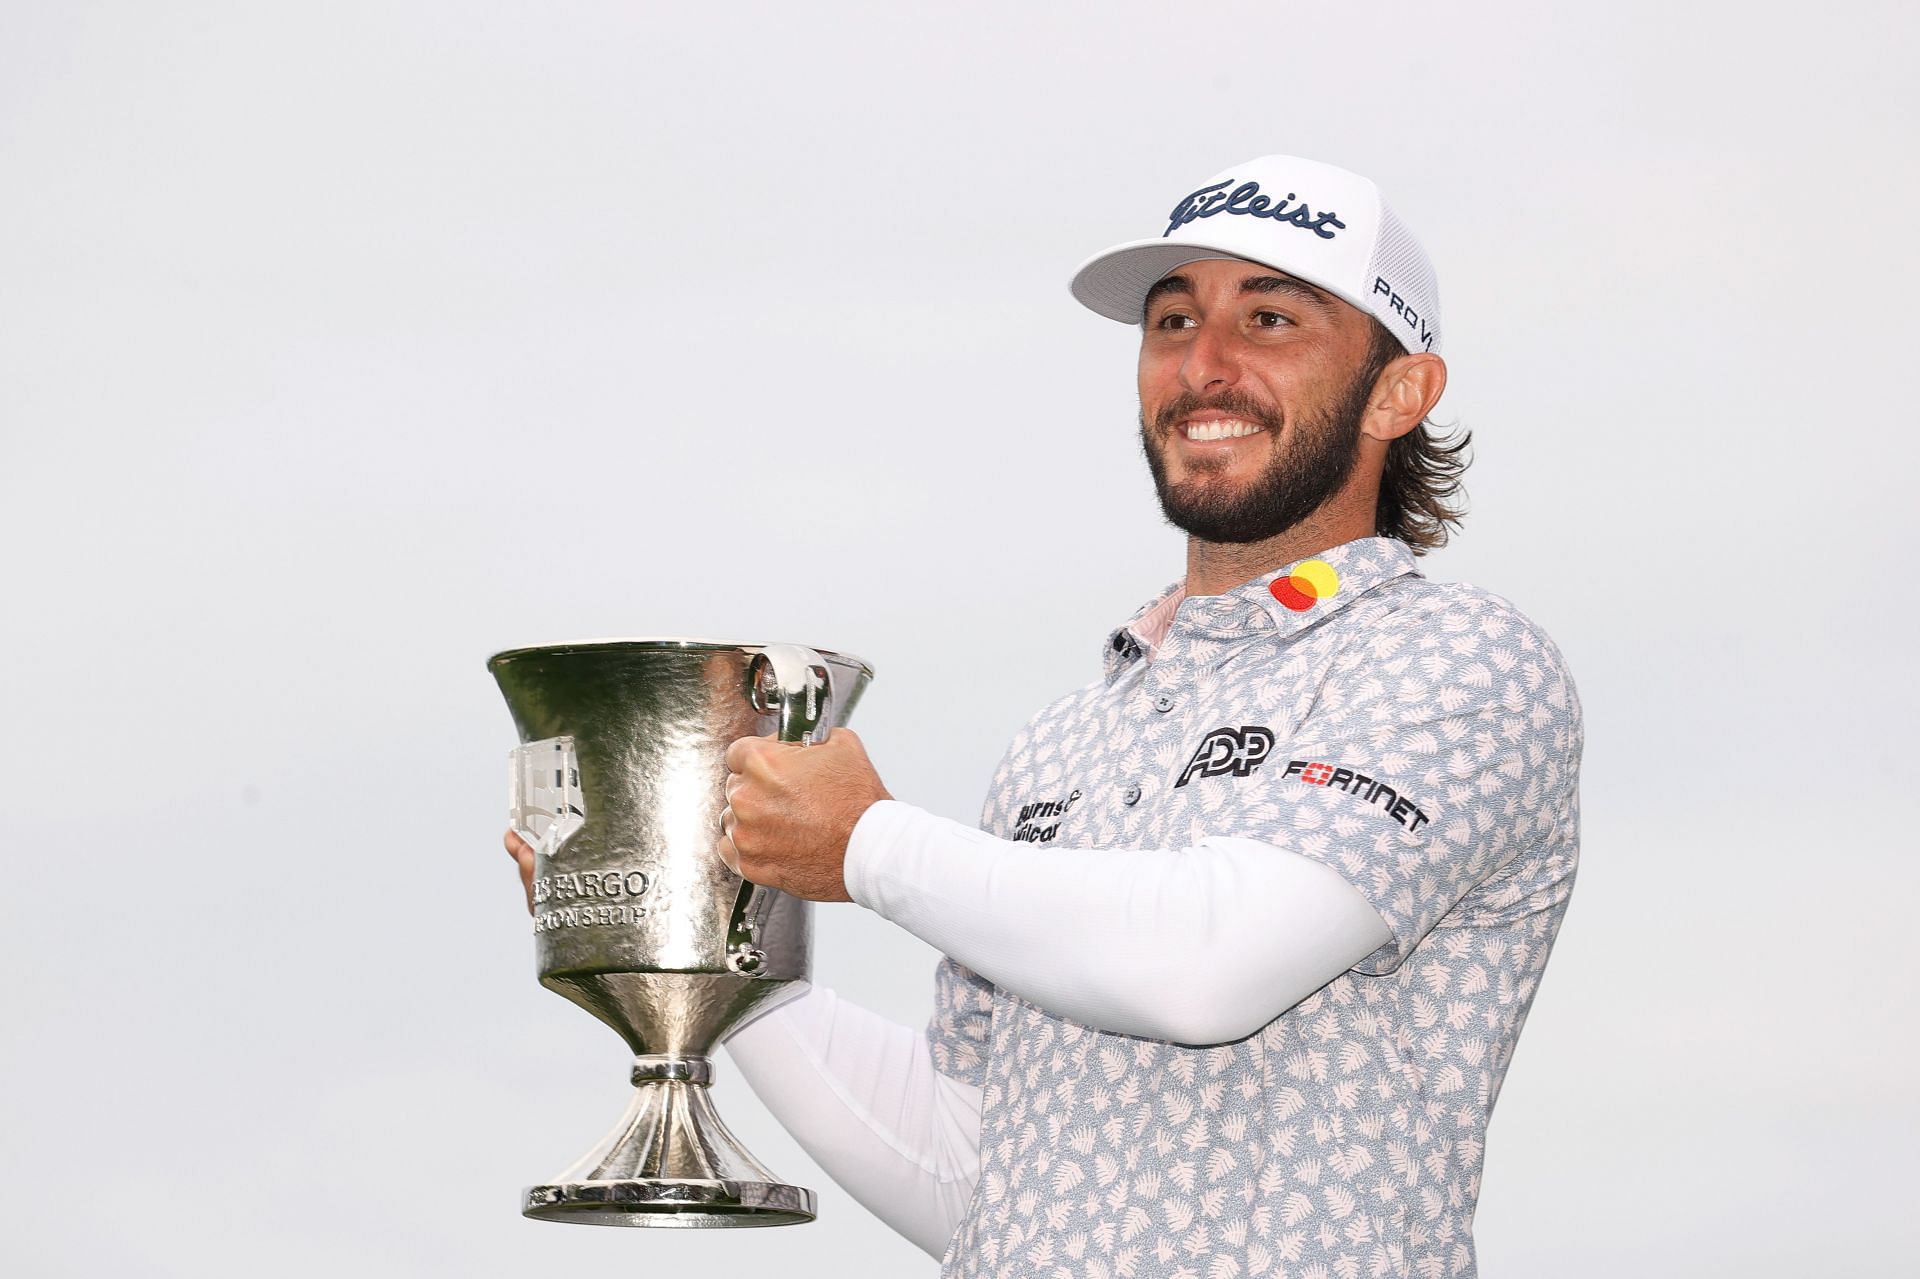 Max Homa won the Wells Fargo Championship for the second time in 2022